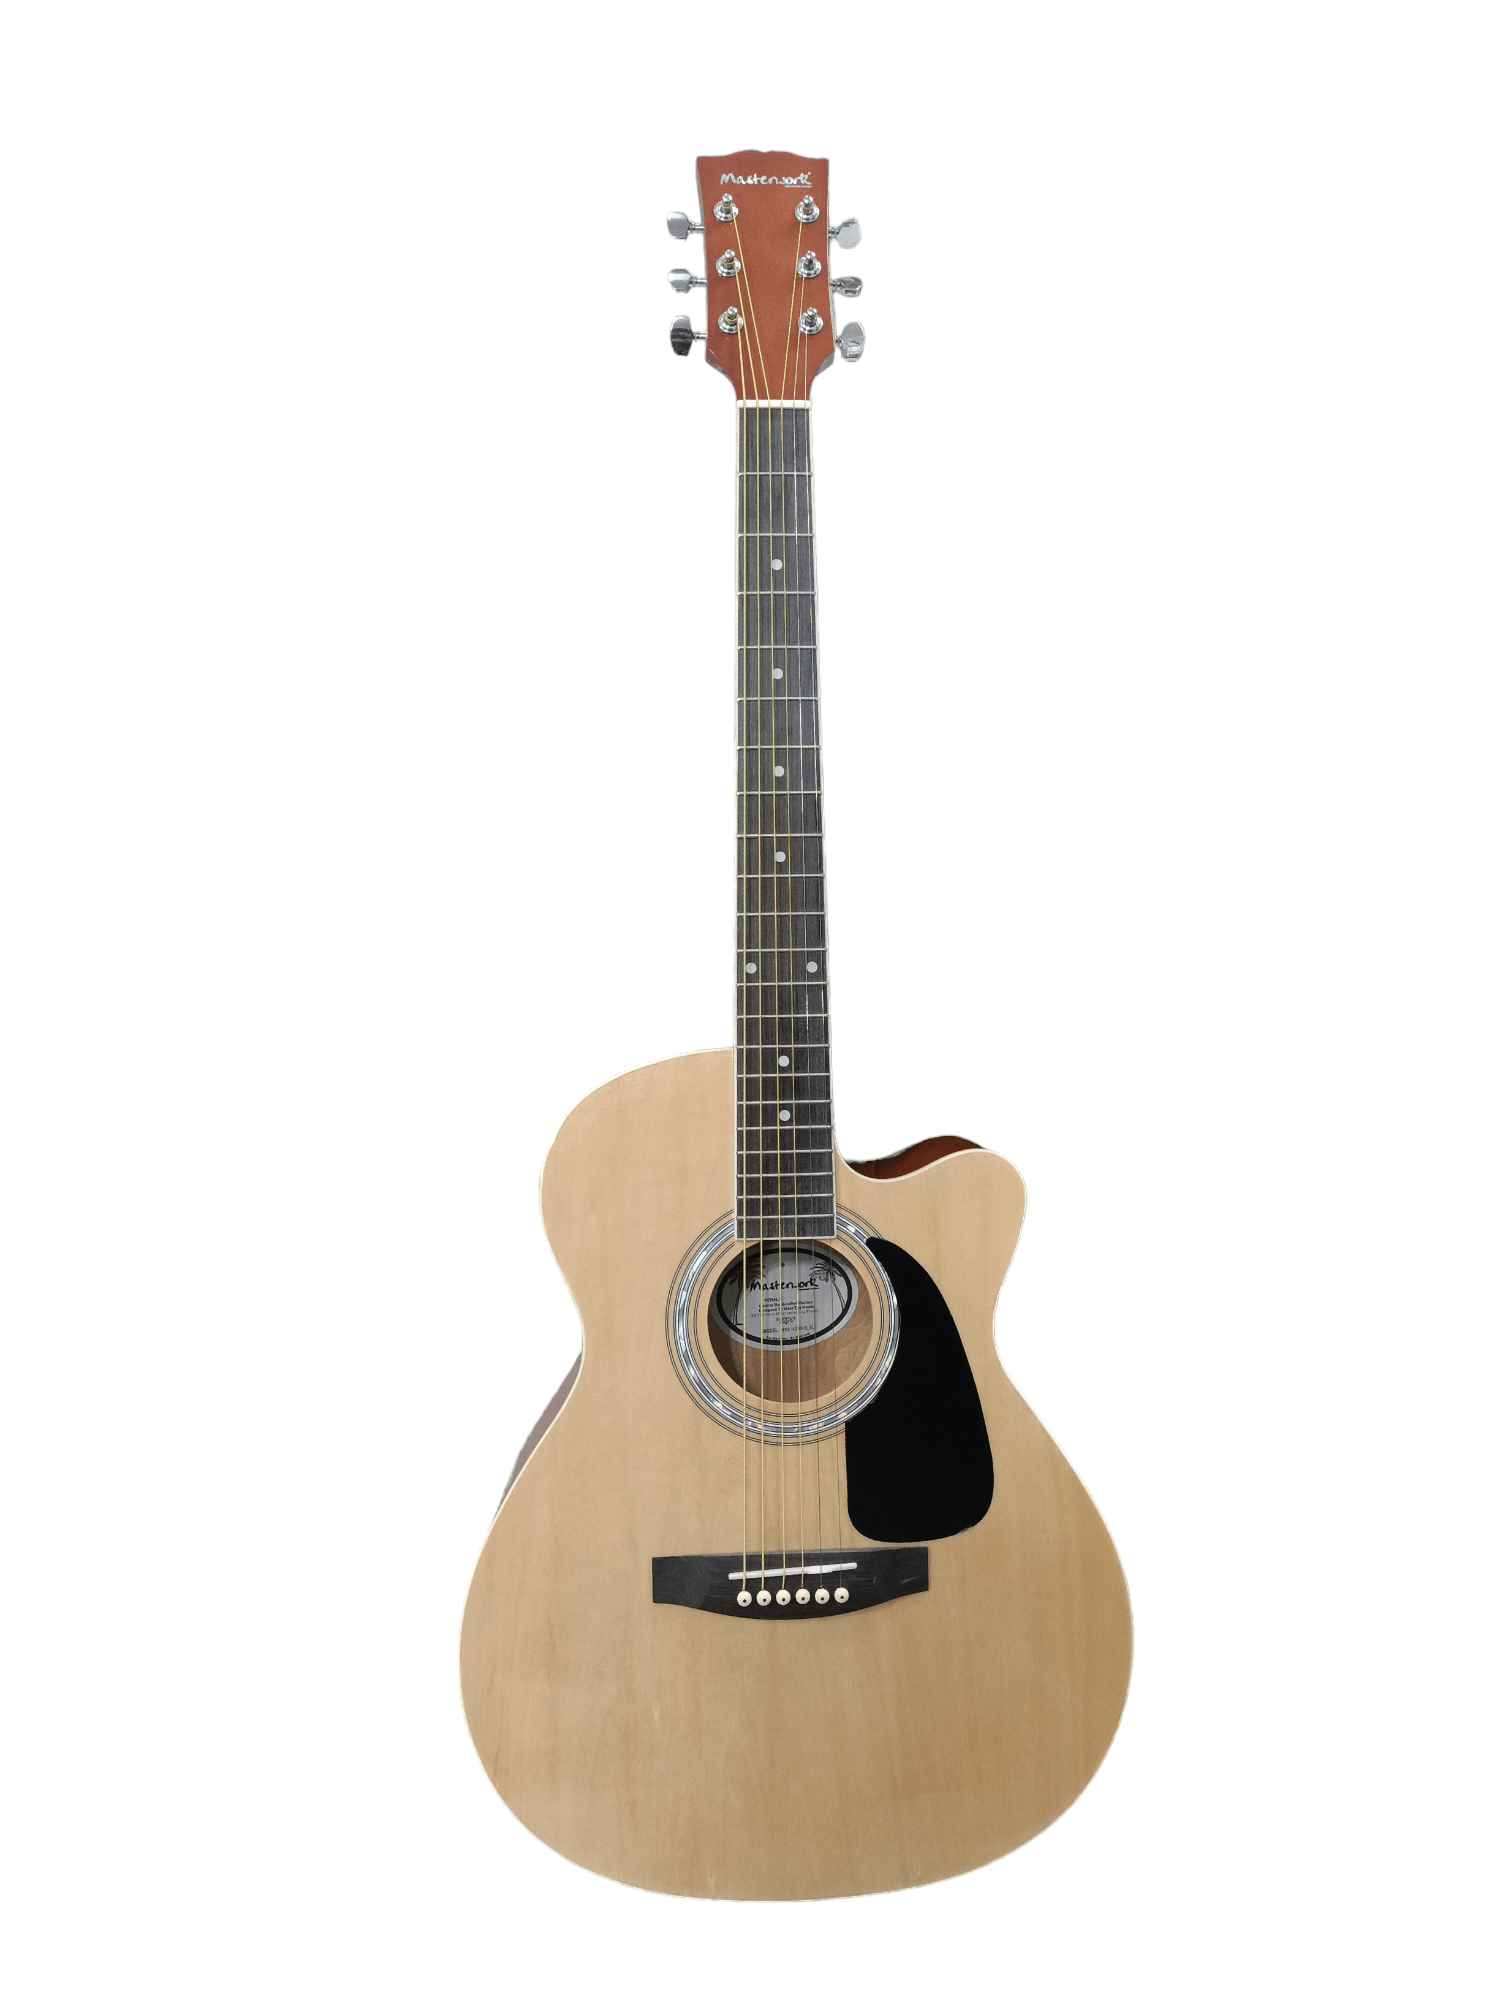 Masterwork electro acoustic guitar with USB input